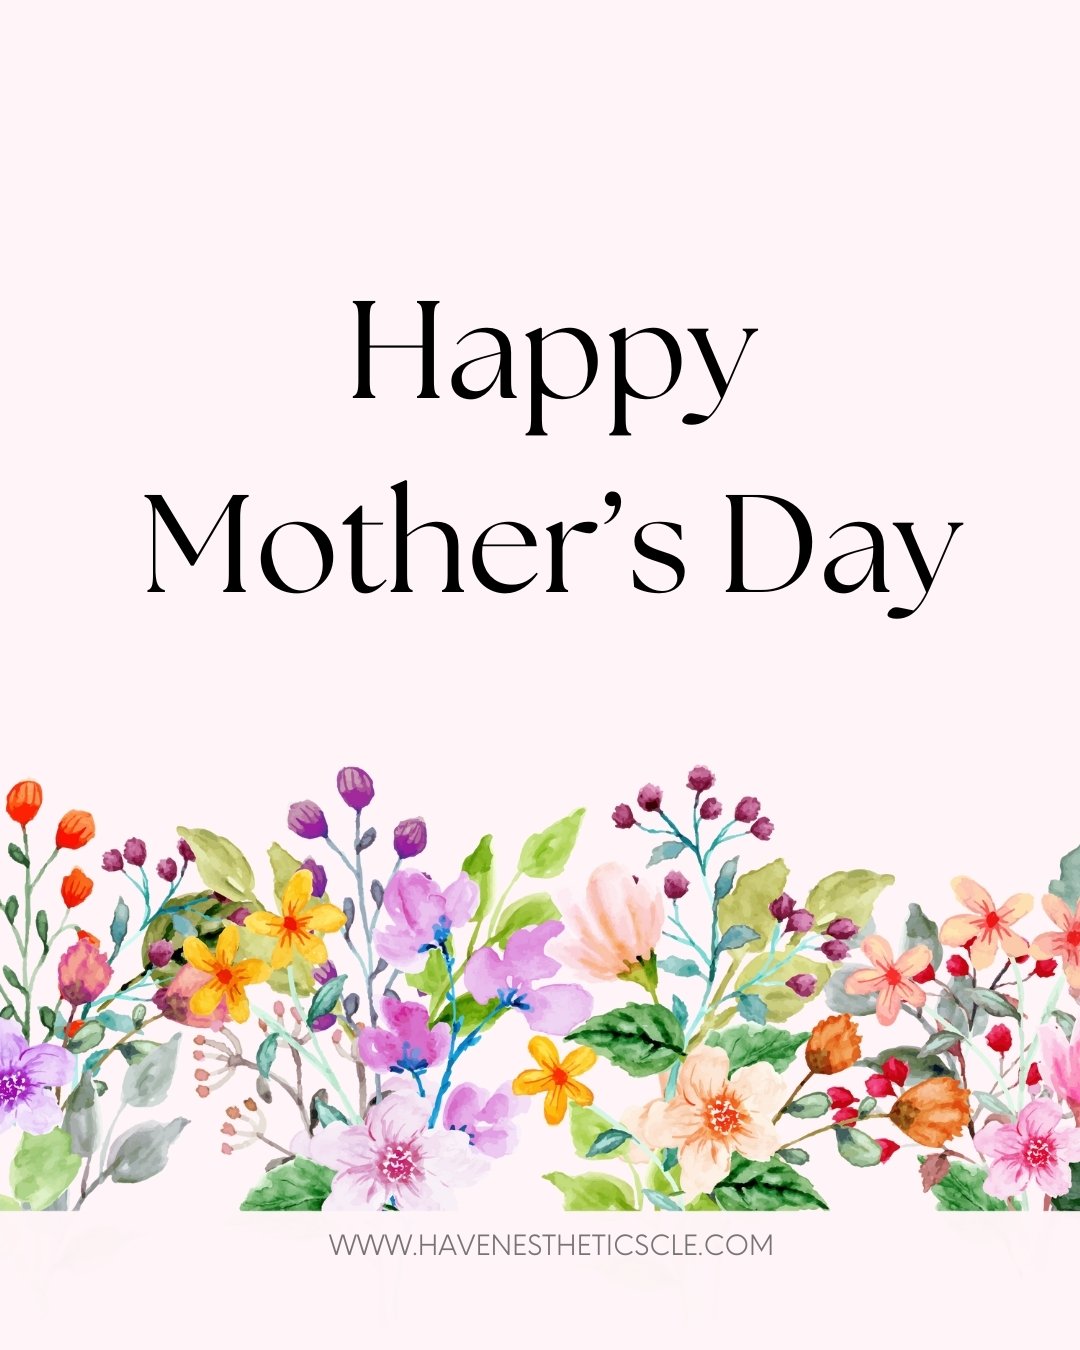 &quot;But behind all your stories is always your mother's story, because hers is where yours begins.&quot; &ndash; Mitch Albom, &quot;For One More Day&quot;

A very Happy Mother's Day to all the amazing moms who inspire us every day! 💐